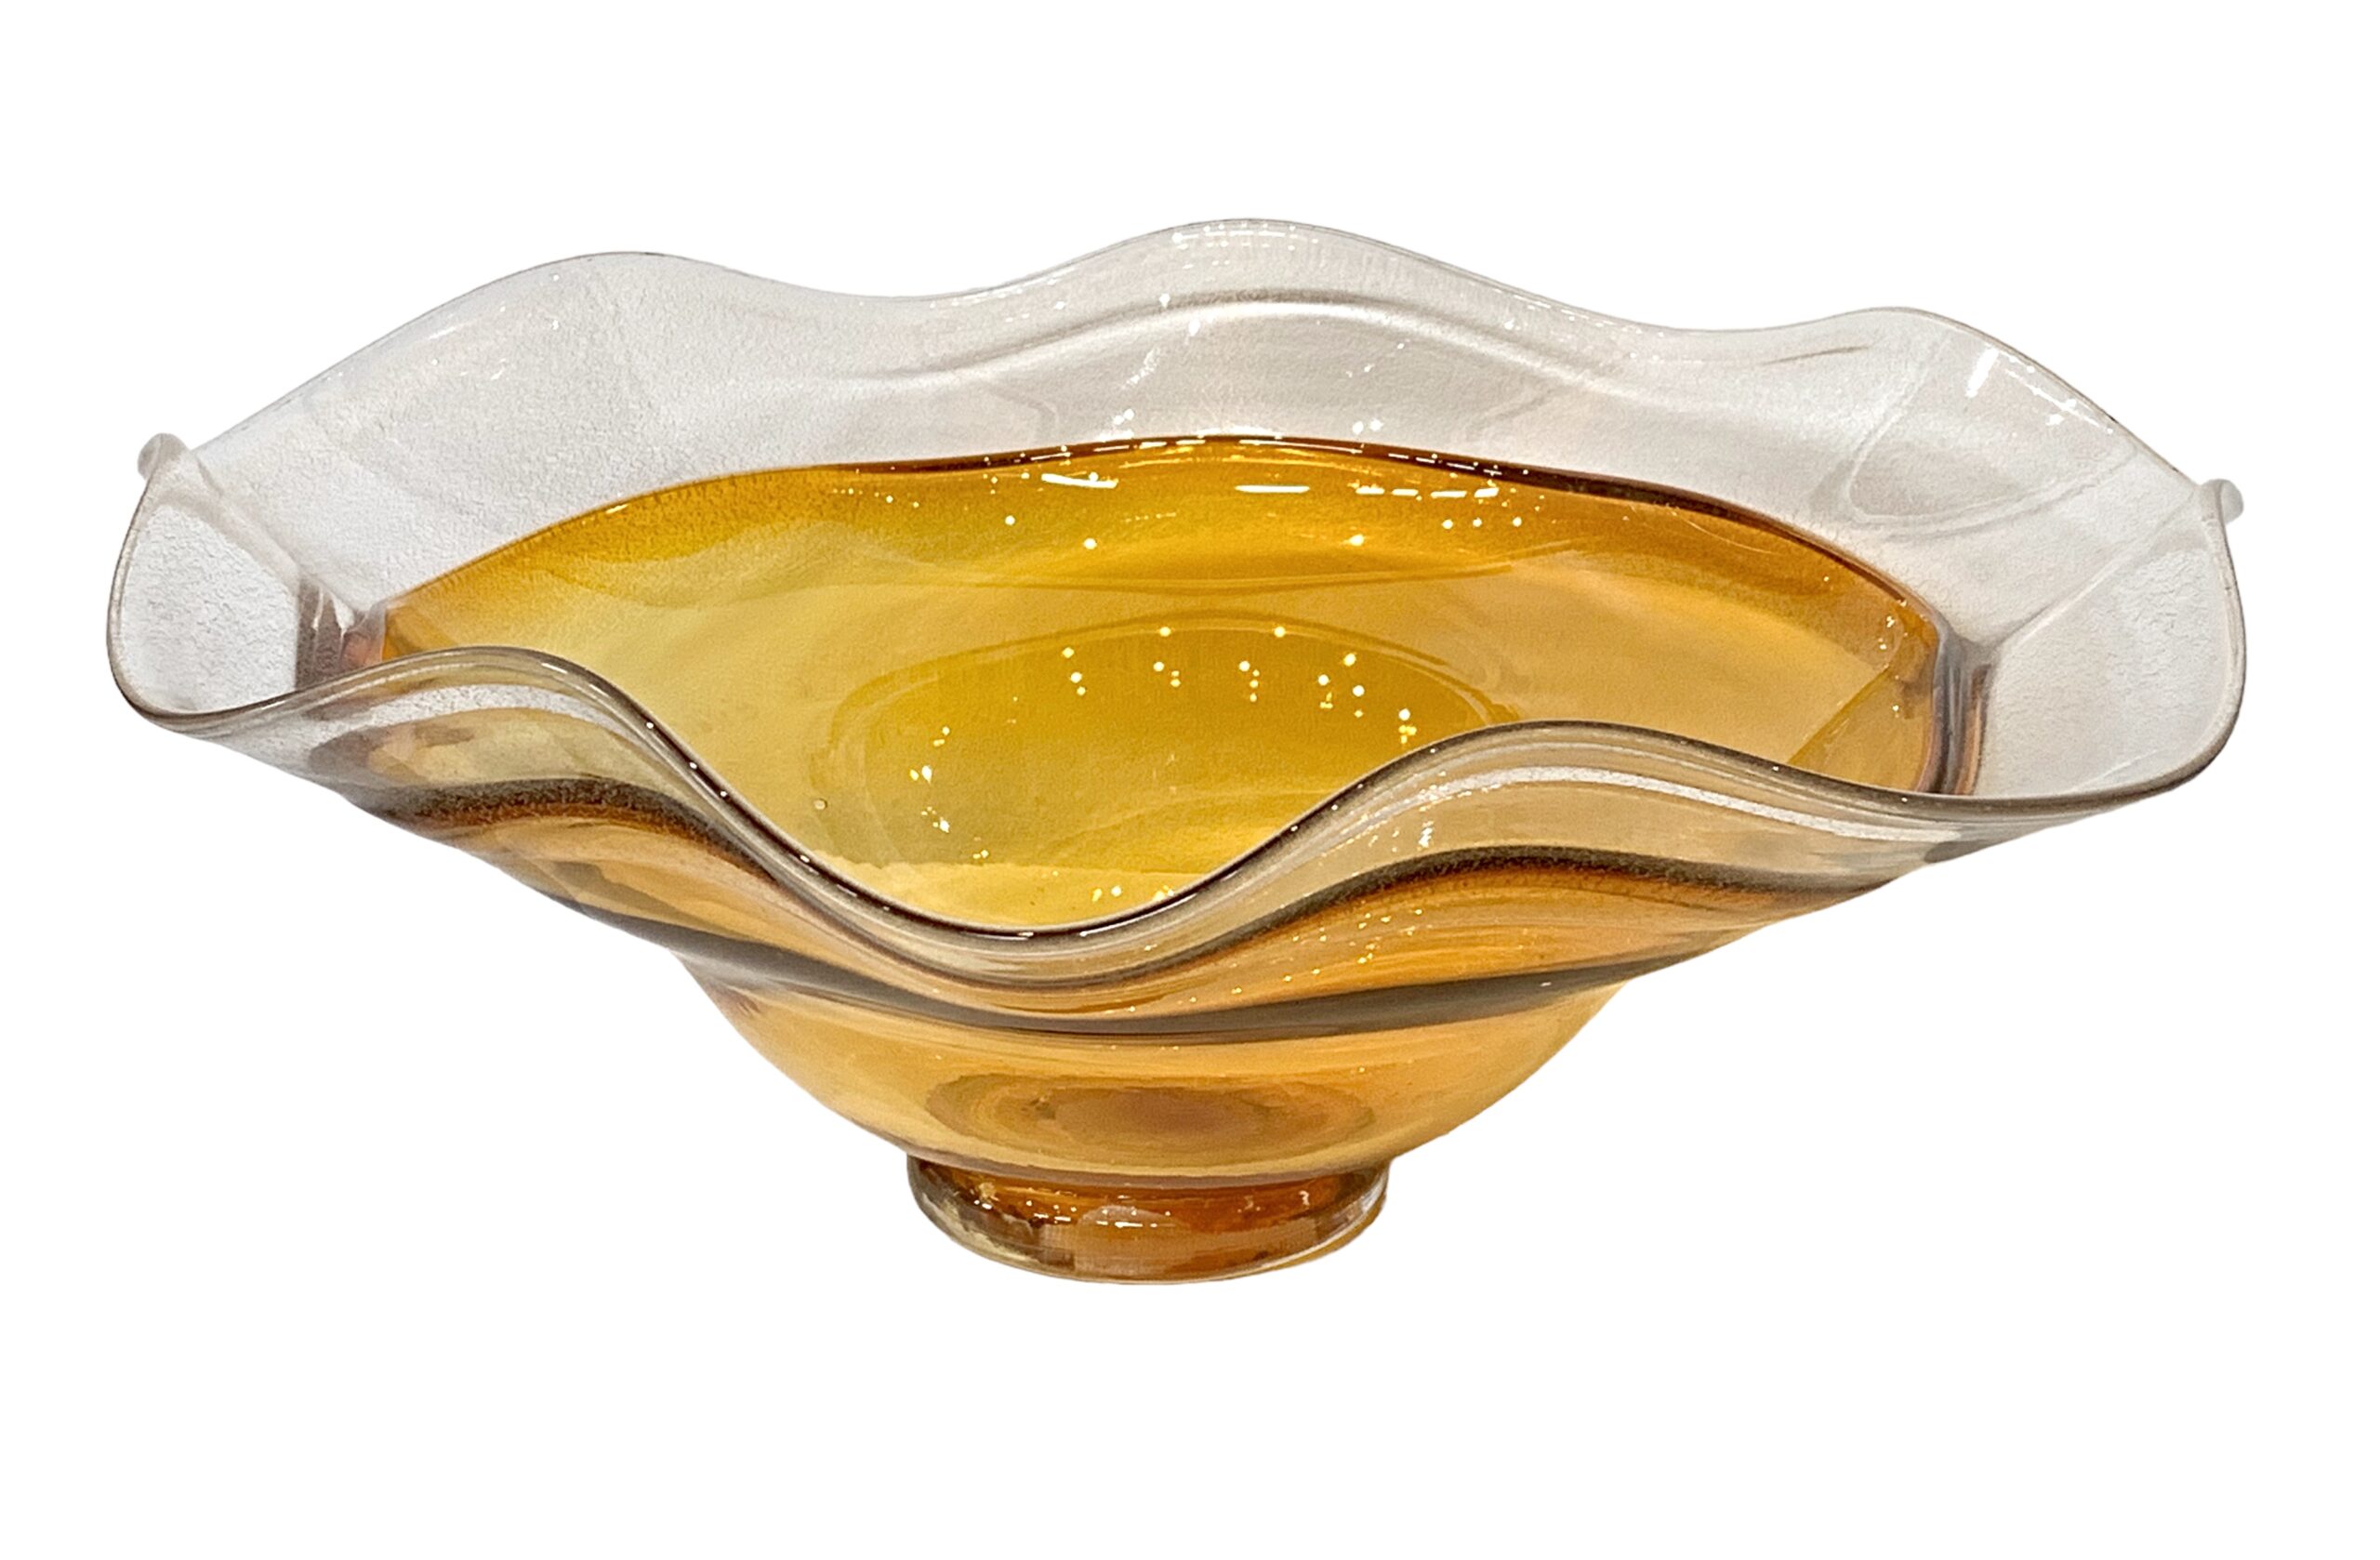 One of a kind yellow blown glass wave bowl by Hayden MacRae at Effusion Art Gallery in Invermere, BC